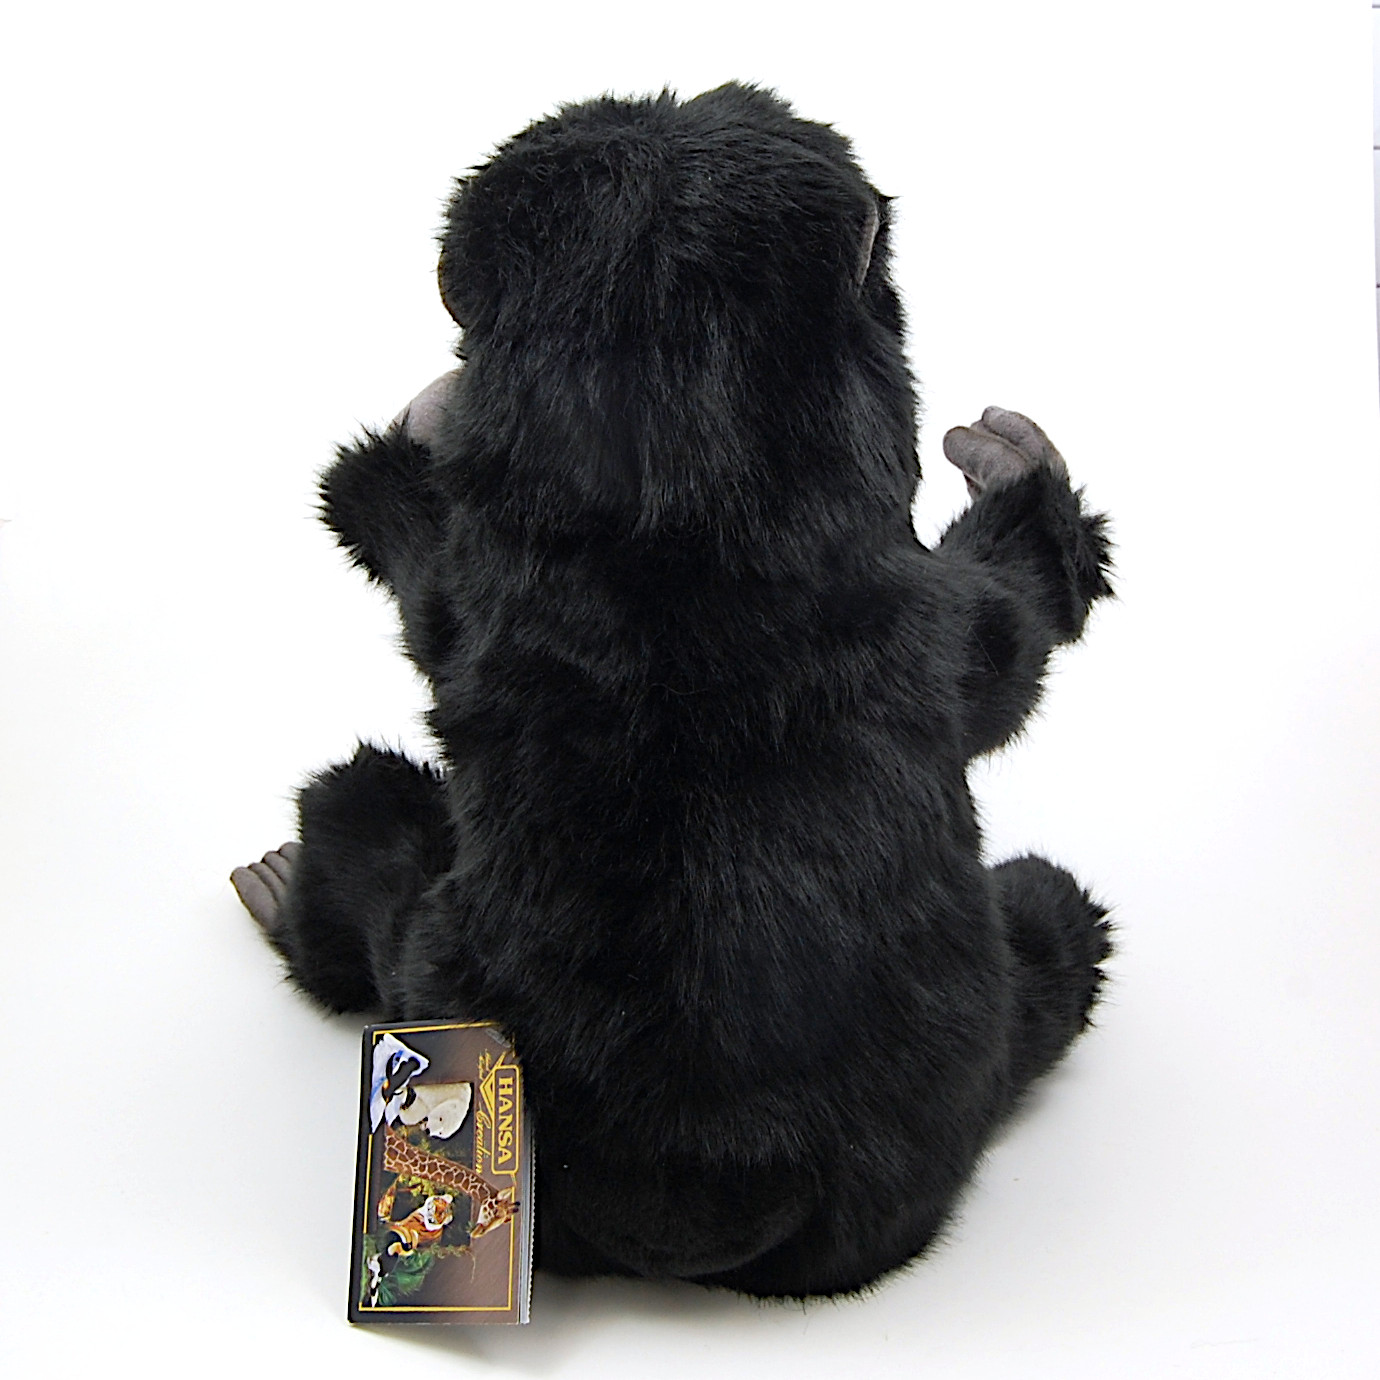 This Gorilla Hand Puppet by Hansa True to Life Look Soft Plush Animal Learning Toy is made with love by Premier Homegoods! Shop more unique gift ideas today with Spots Initiatives, the best way to support creators.